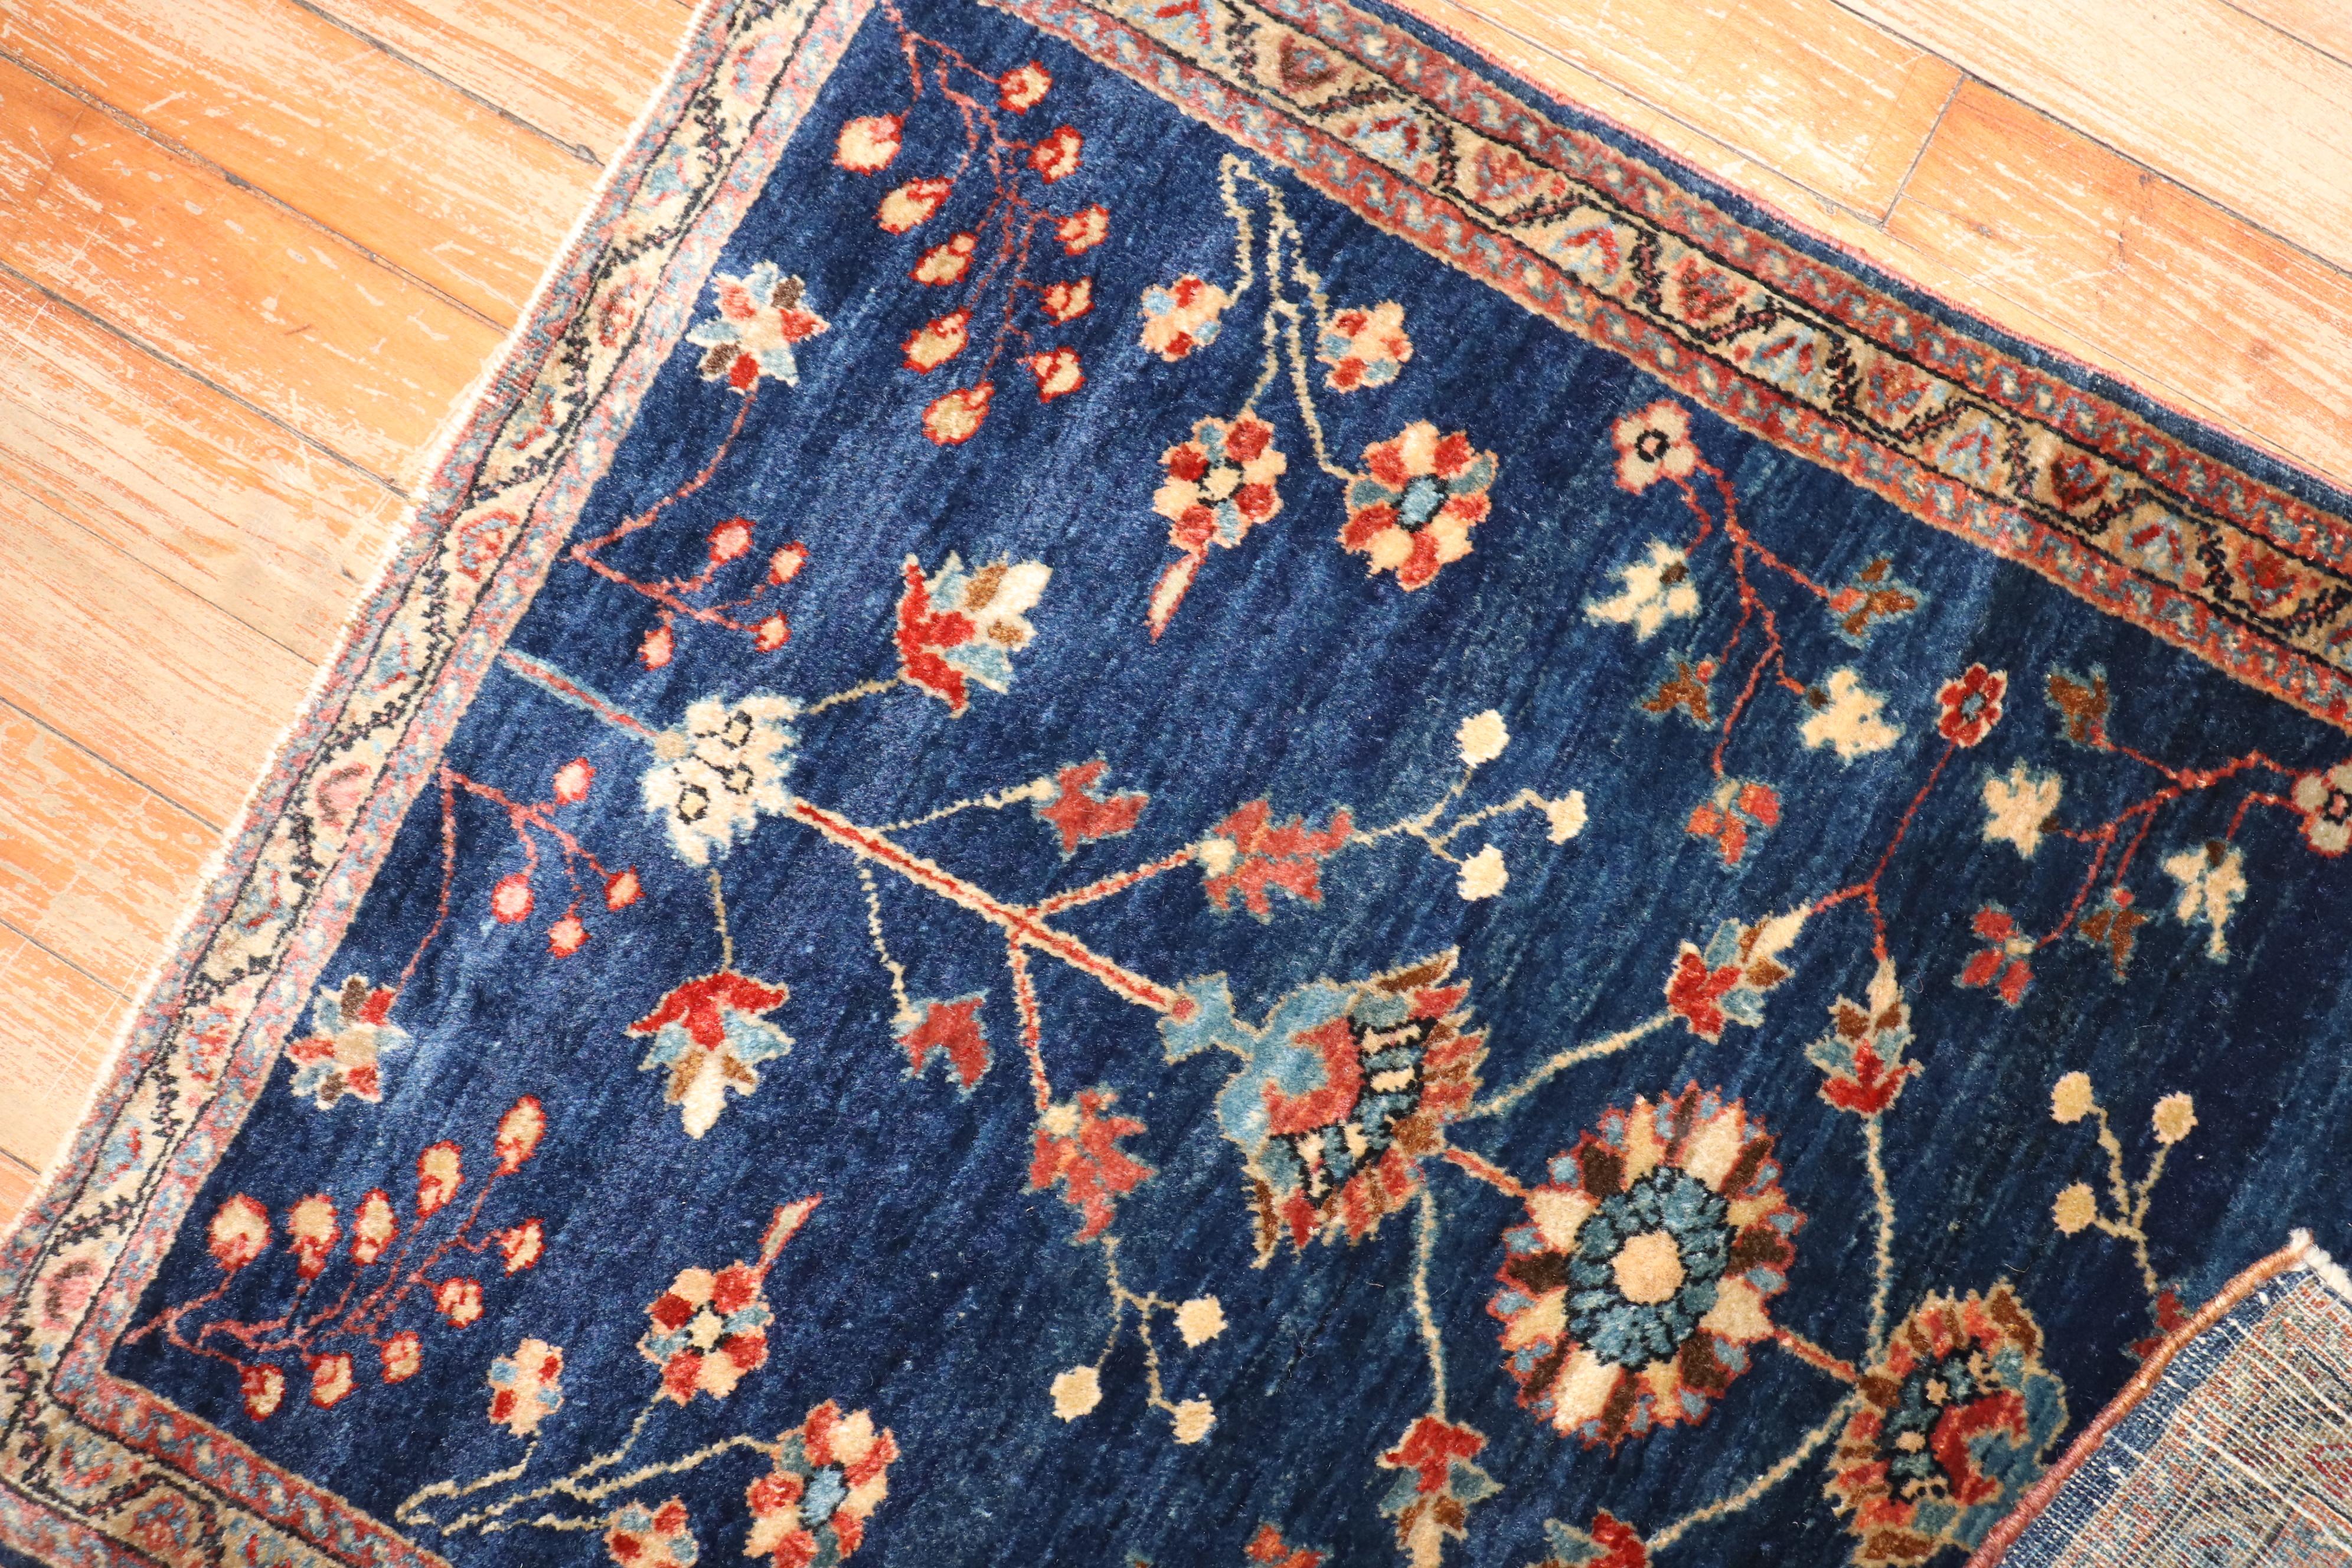 Zabihi Collection Antique Navy Blue Persian Sarouk Rug In Good Condition For Sale In New York, NY